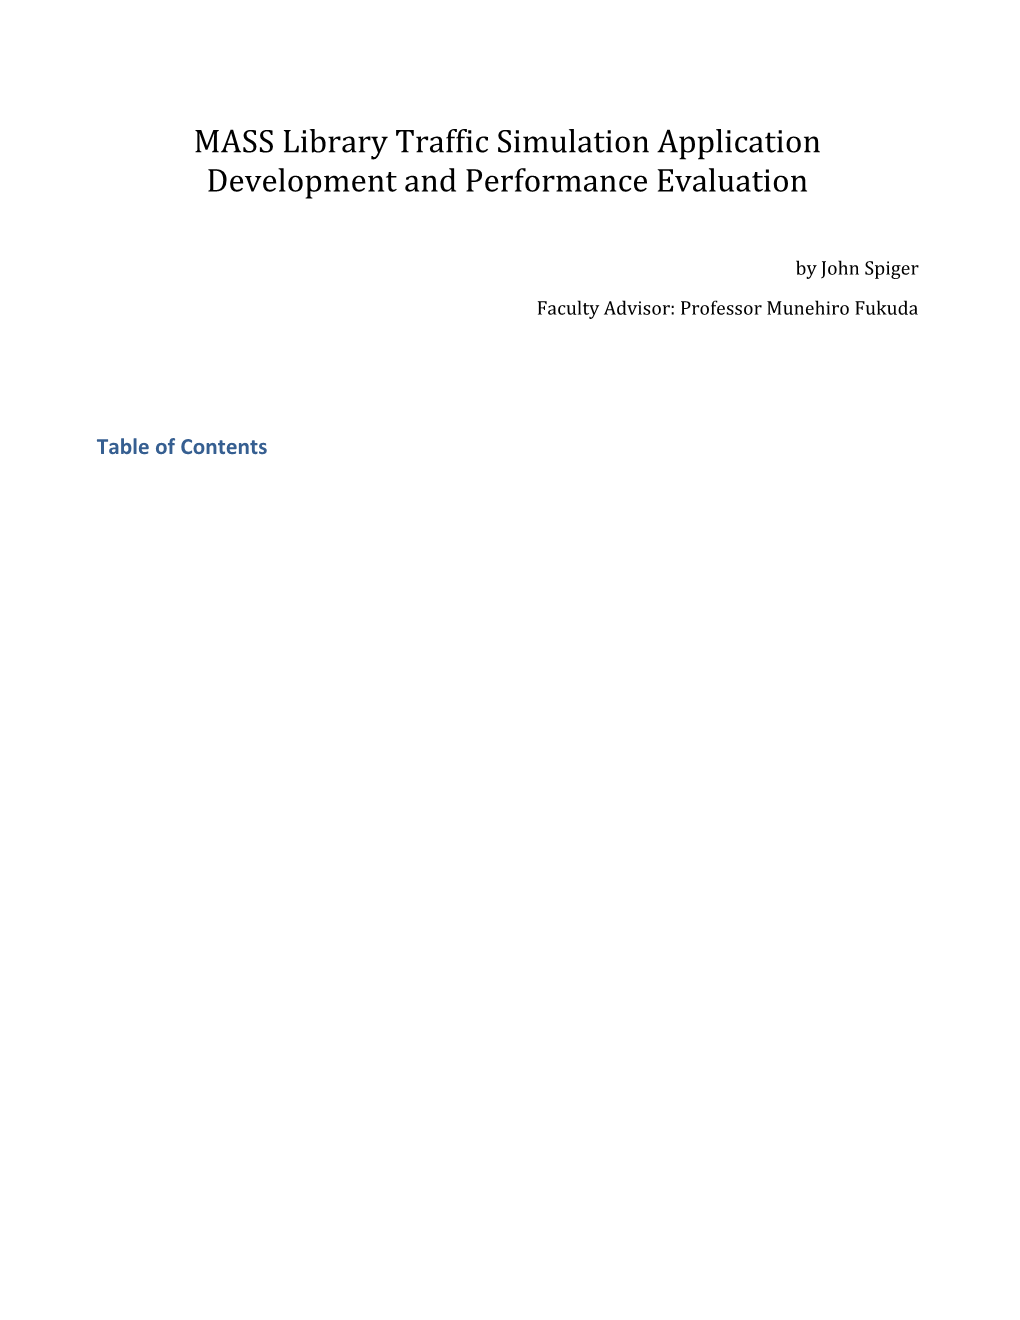 MASS Library Traffic Simulation Application Development and Performance Evaluation